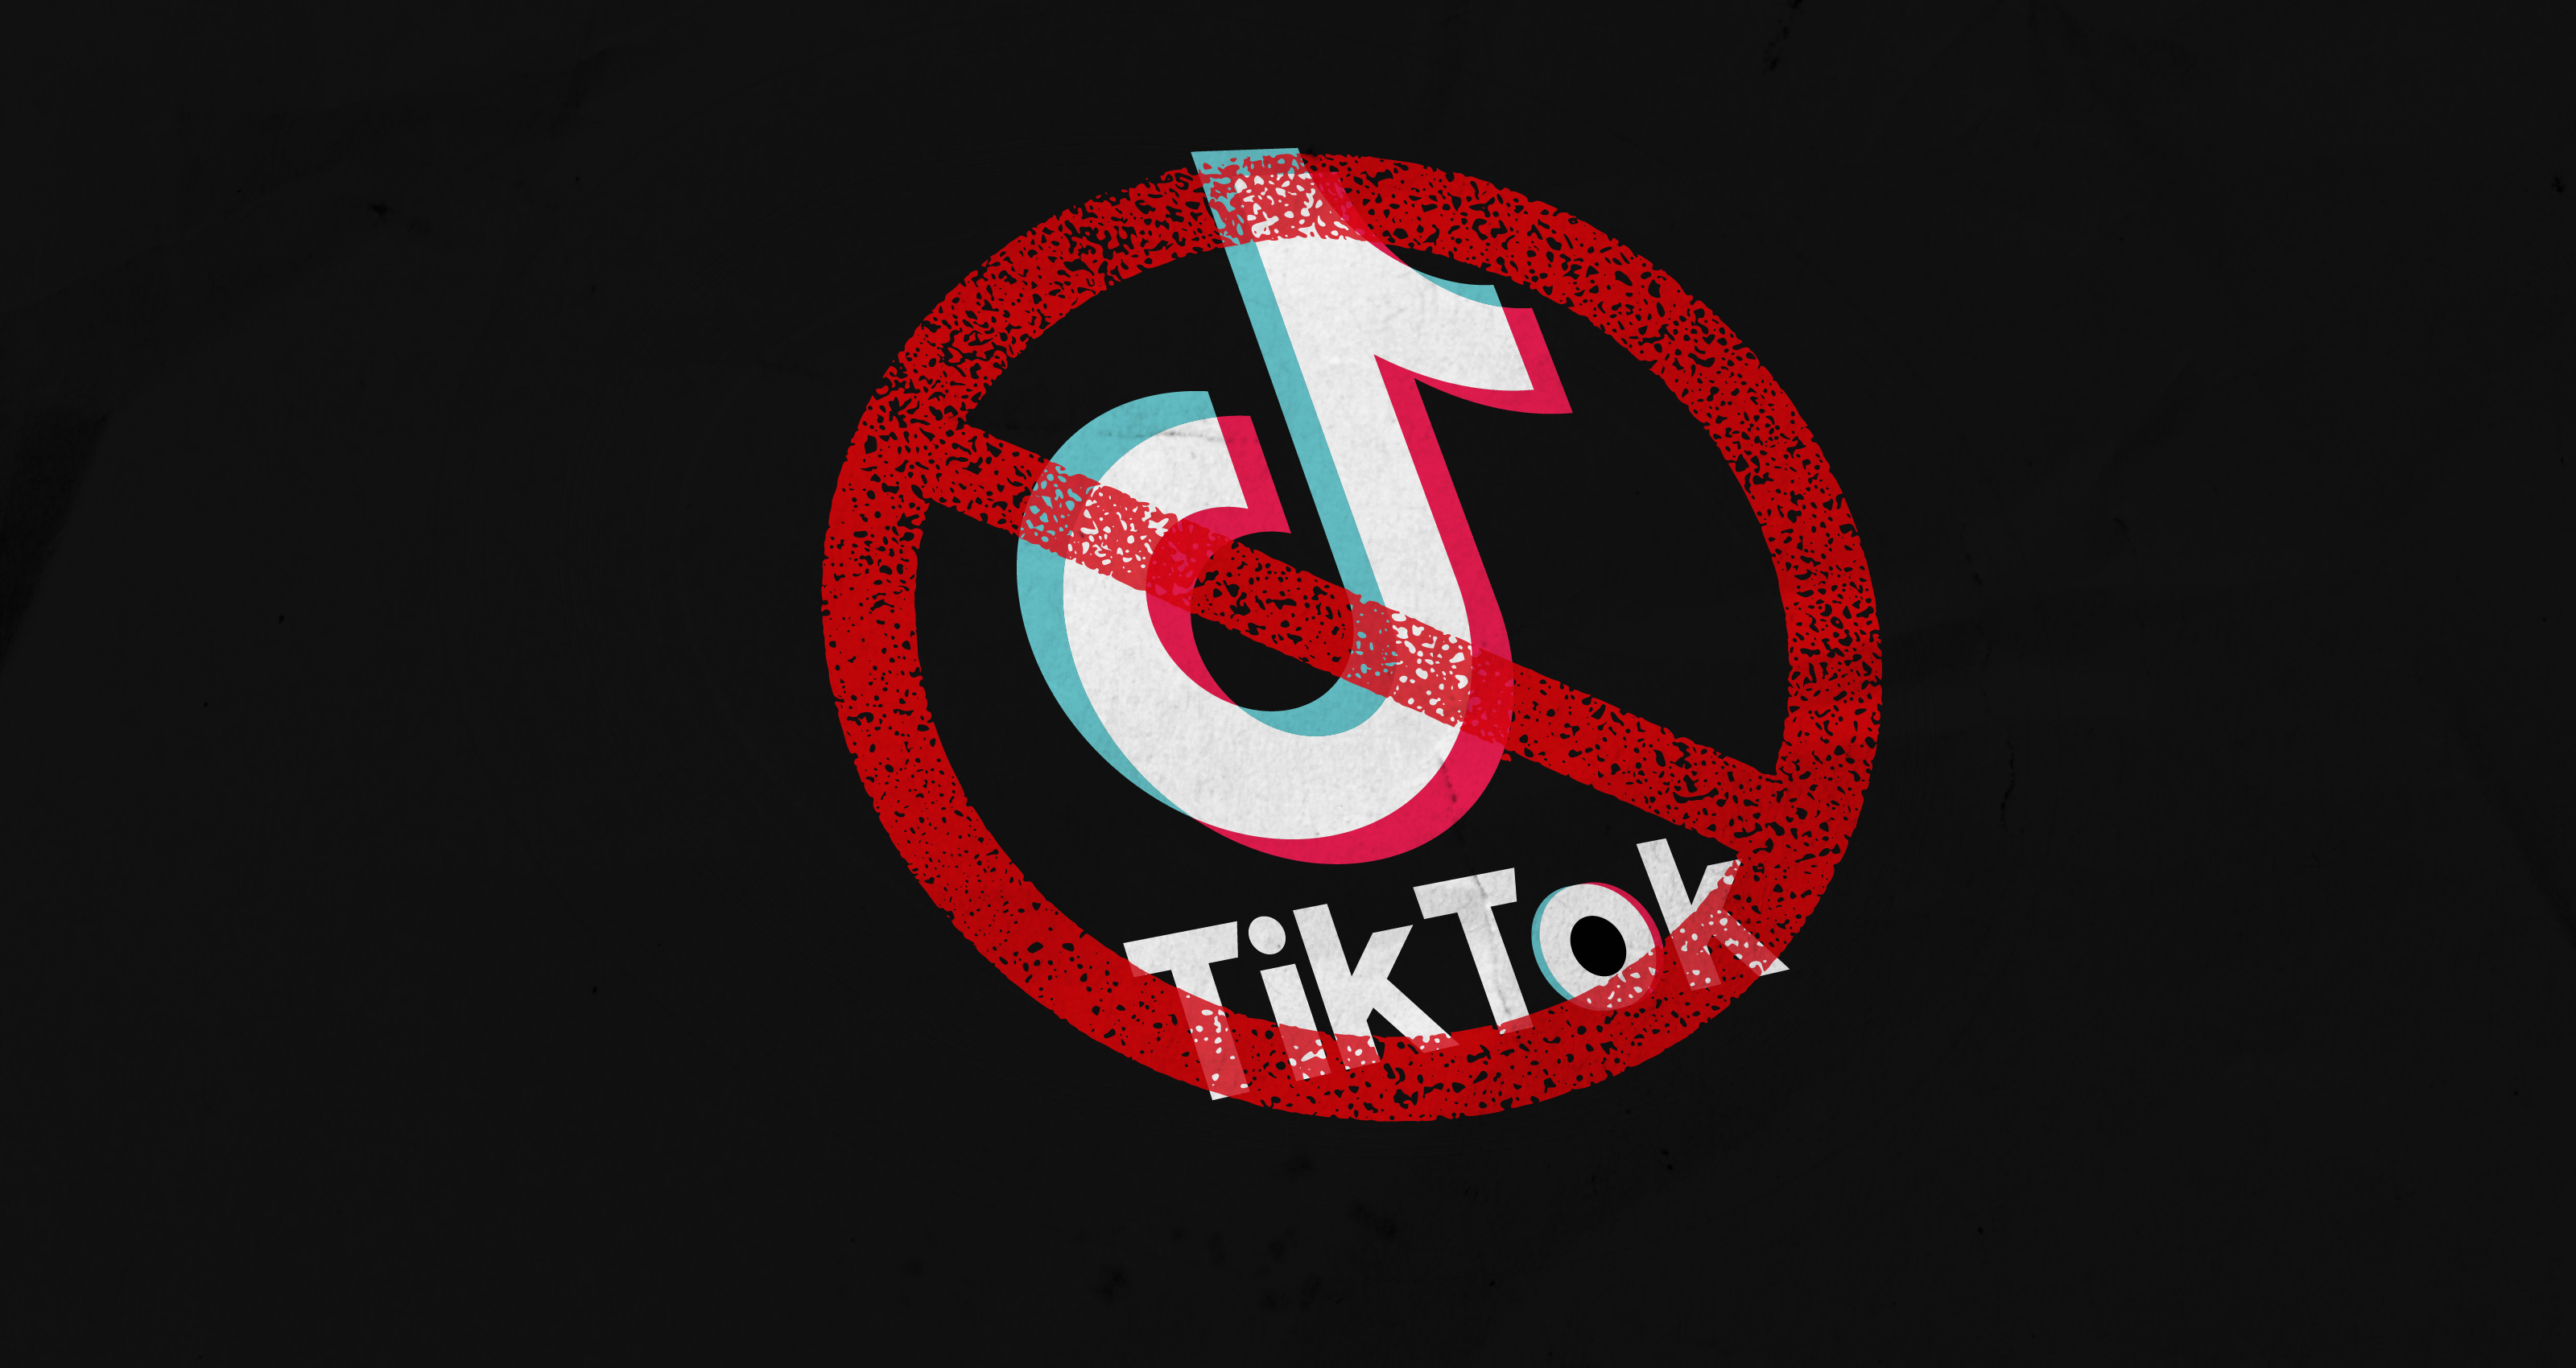 What's going on with the new bill that could ban TikTok?